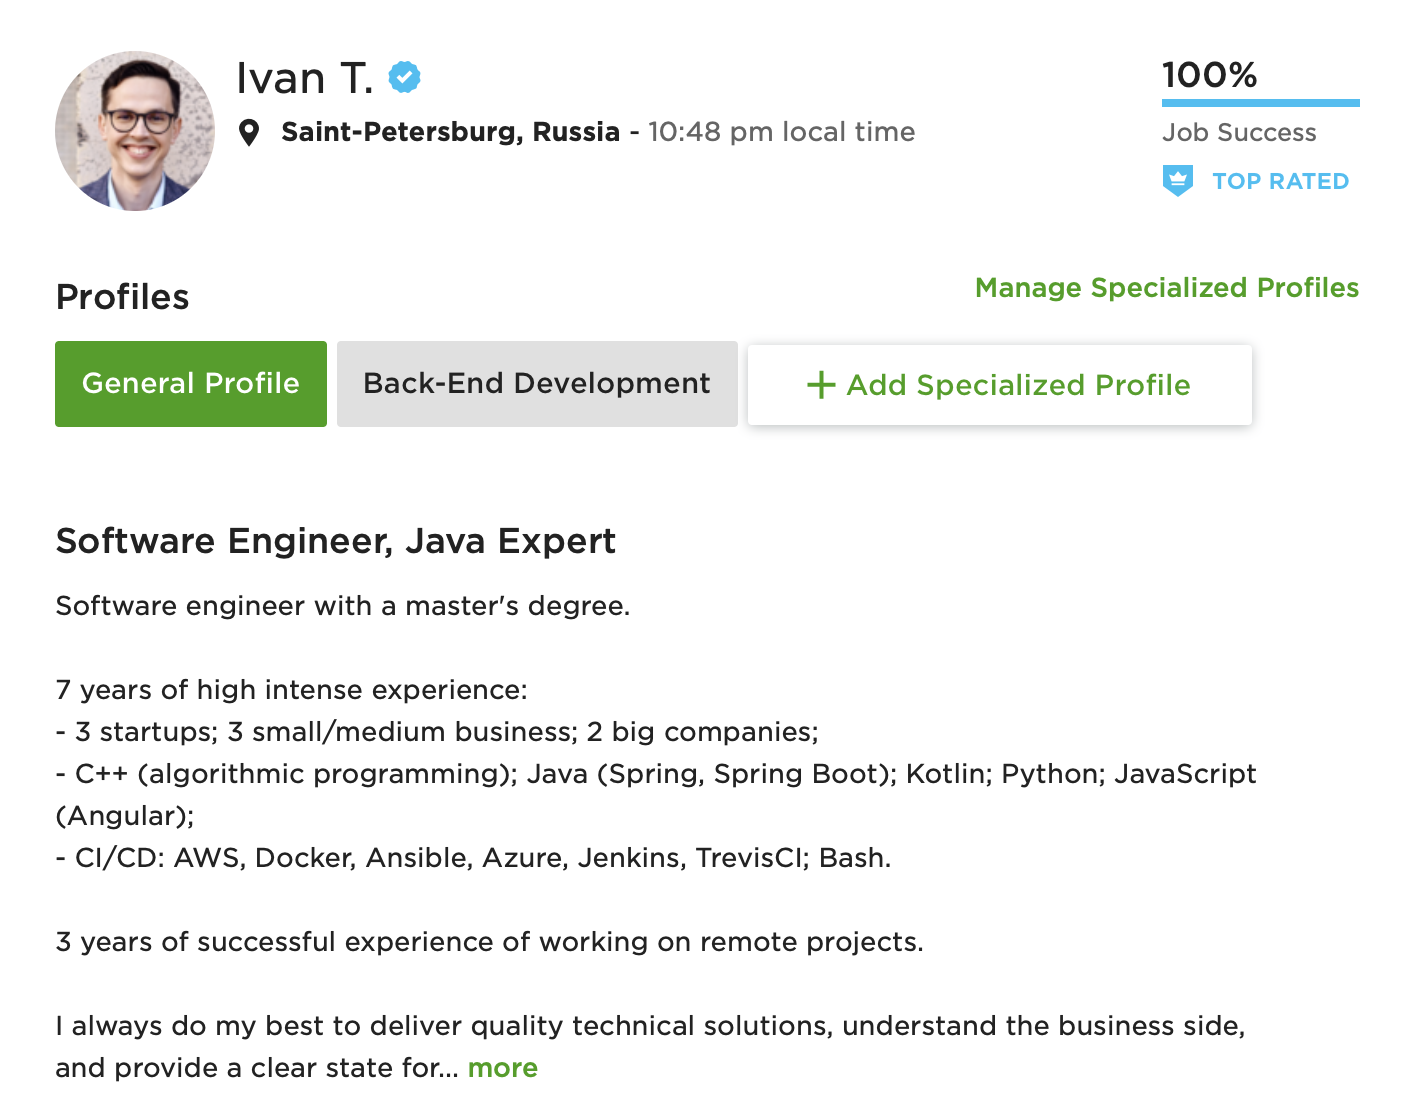 Upwork Profiles: Why a Great Title and Overview Matter